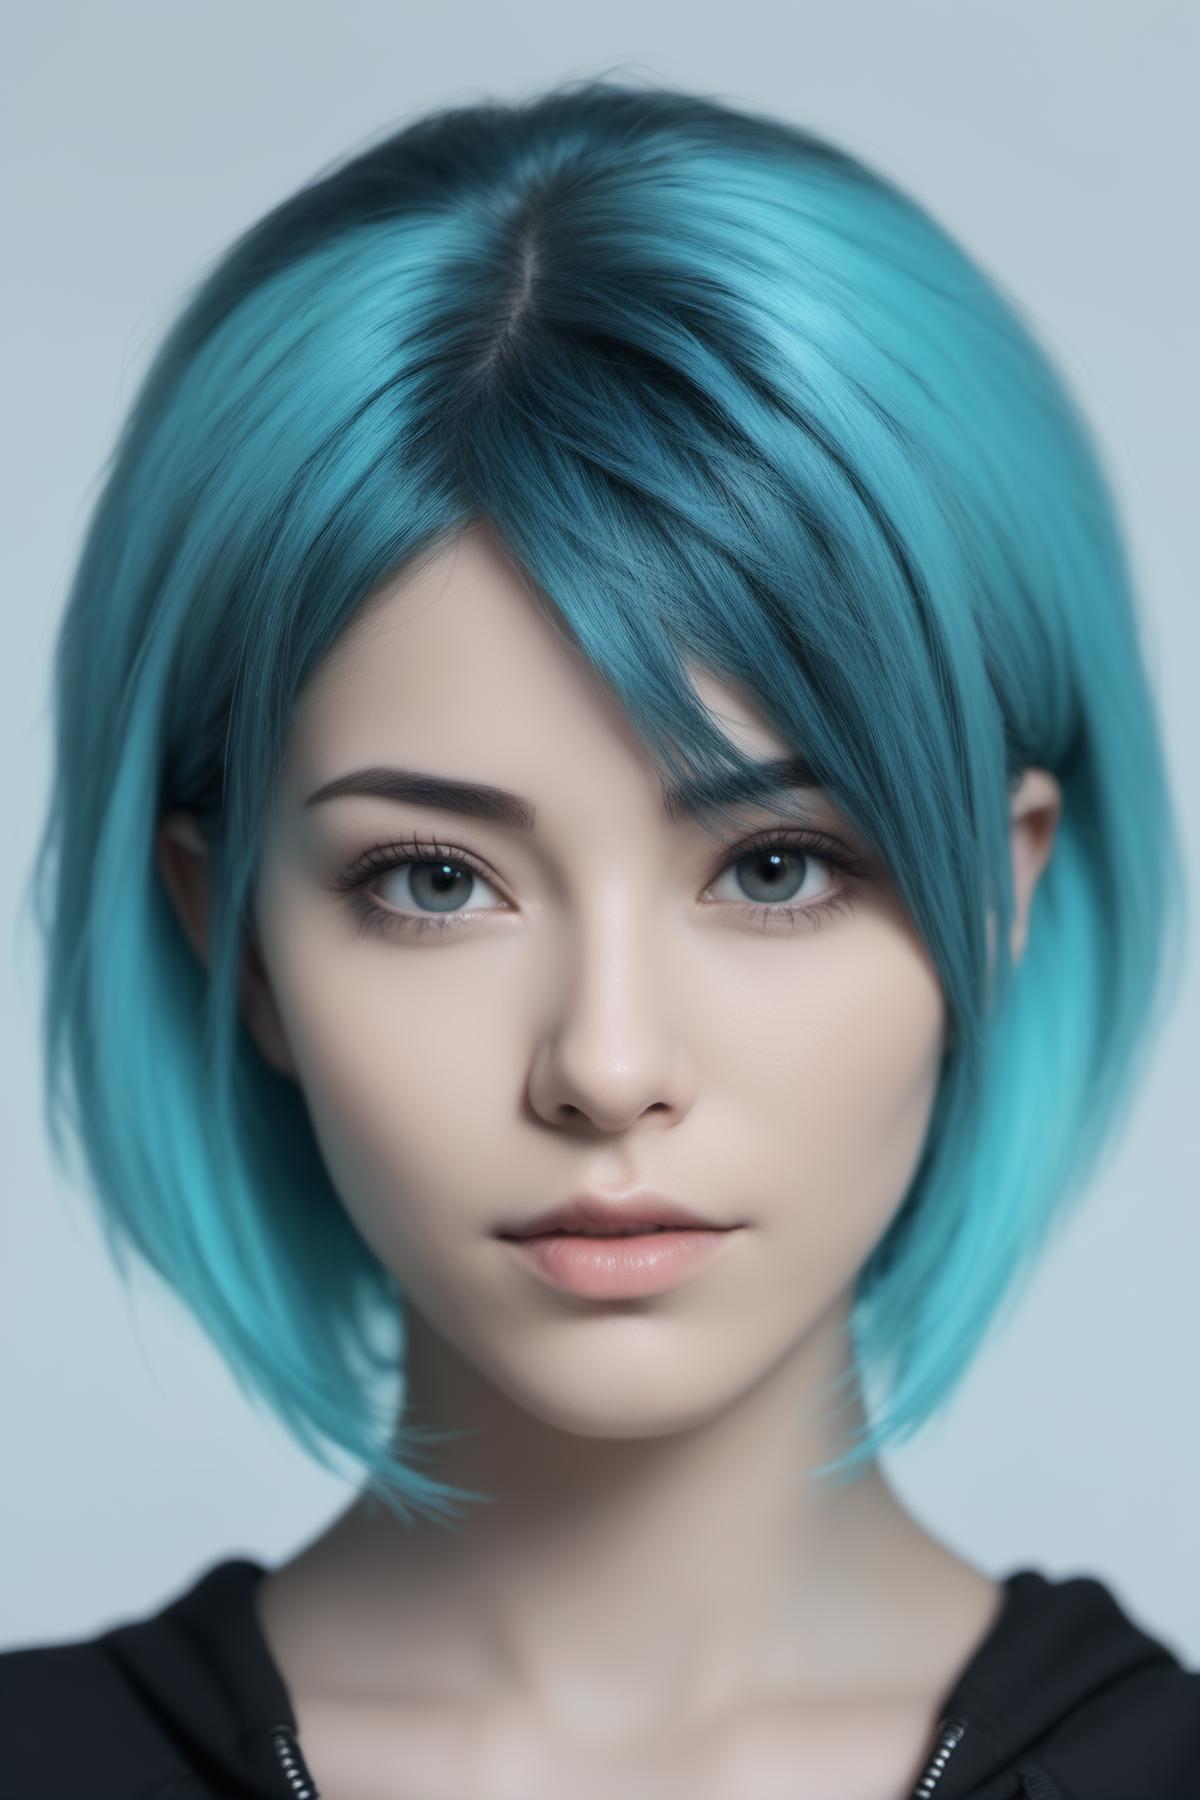 AI model image by theAstroBruh